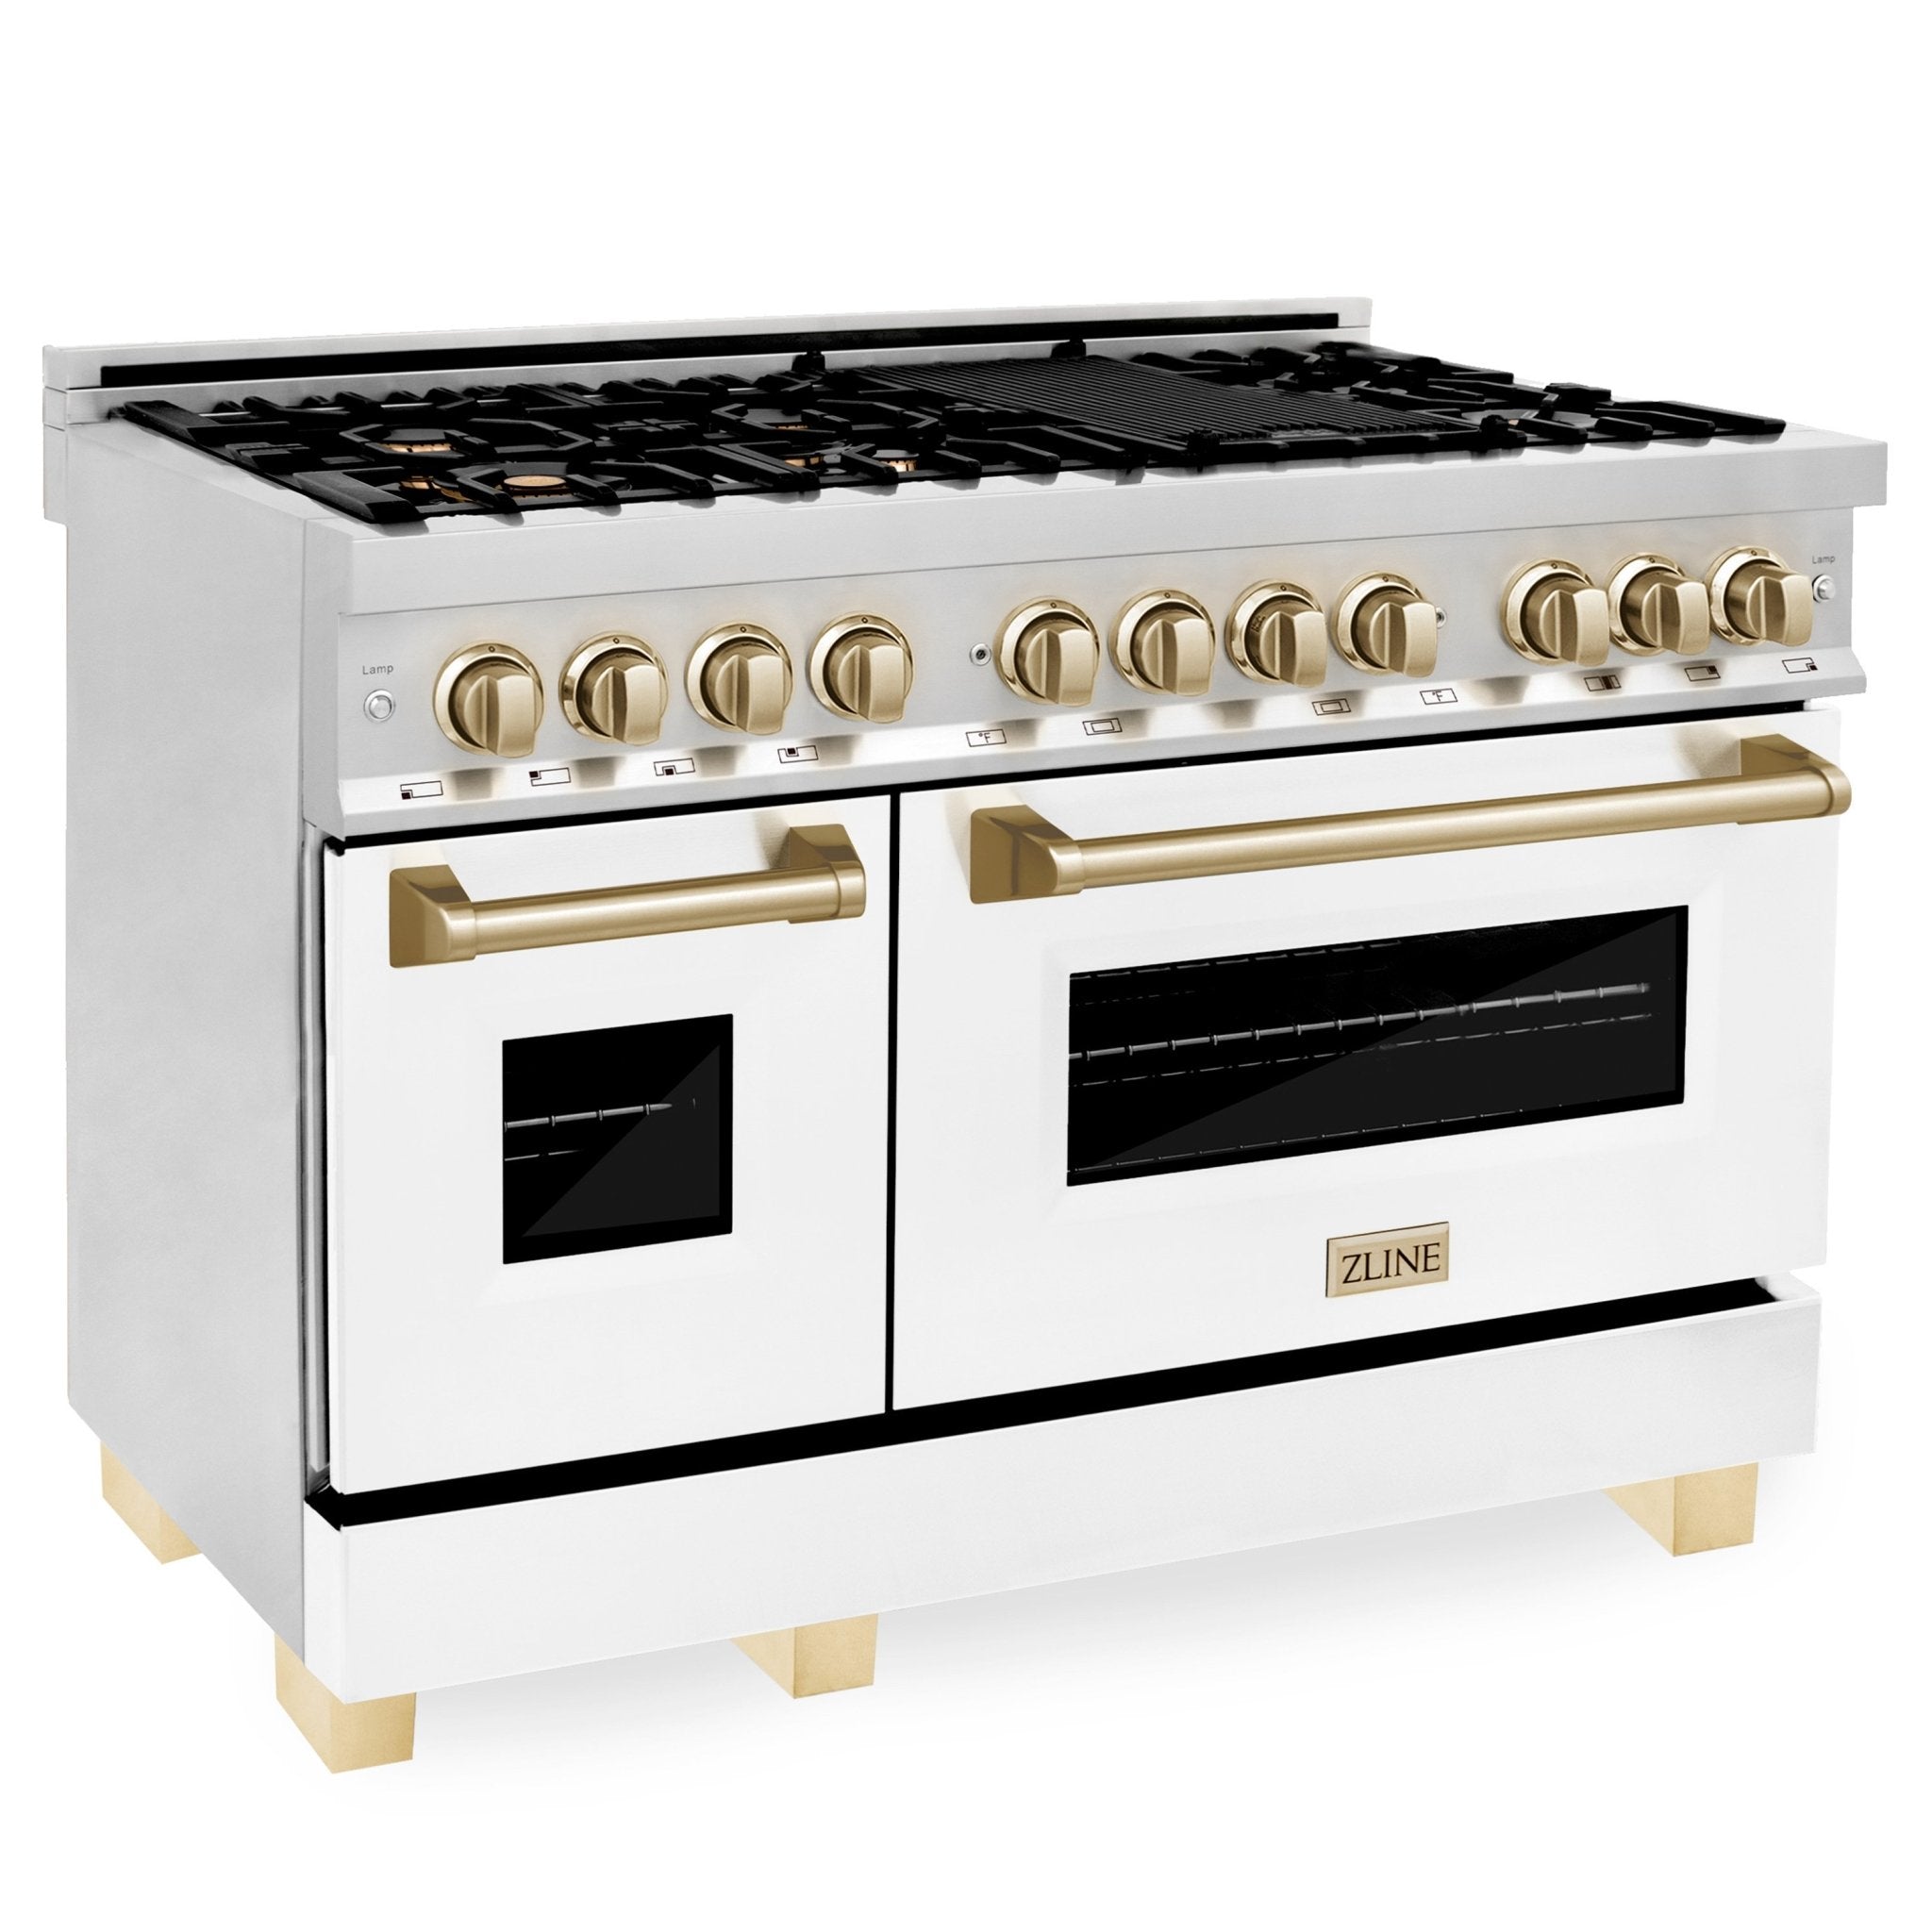 ZLINE Autograph Edition 48" 6.0 cu. ft. Dual Fuel Range with Gas Stove and Electric Oven in Stainless Steel with White Matte Door and Accents (RAZ-WM-48) - Rustic Kitchen & Bath - Ranges - ZLINE Kitchen and Bath